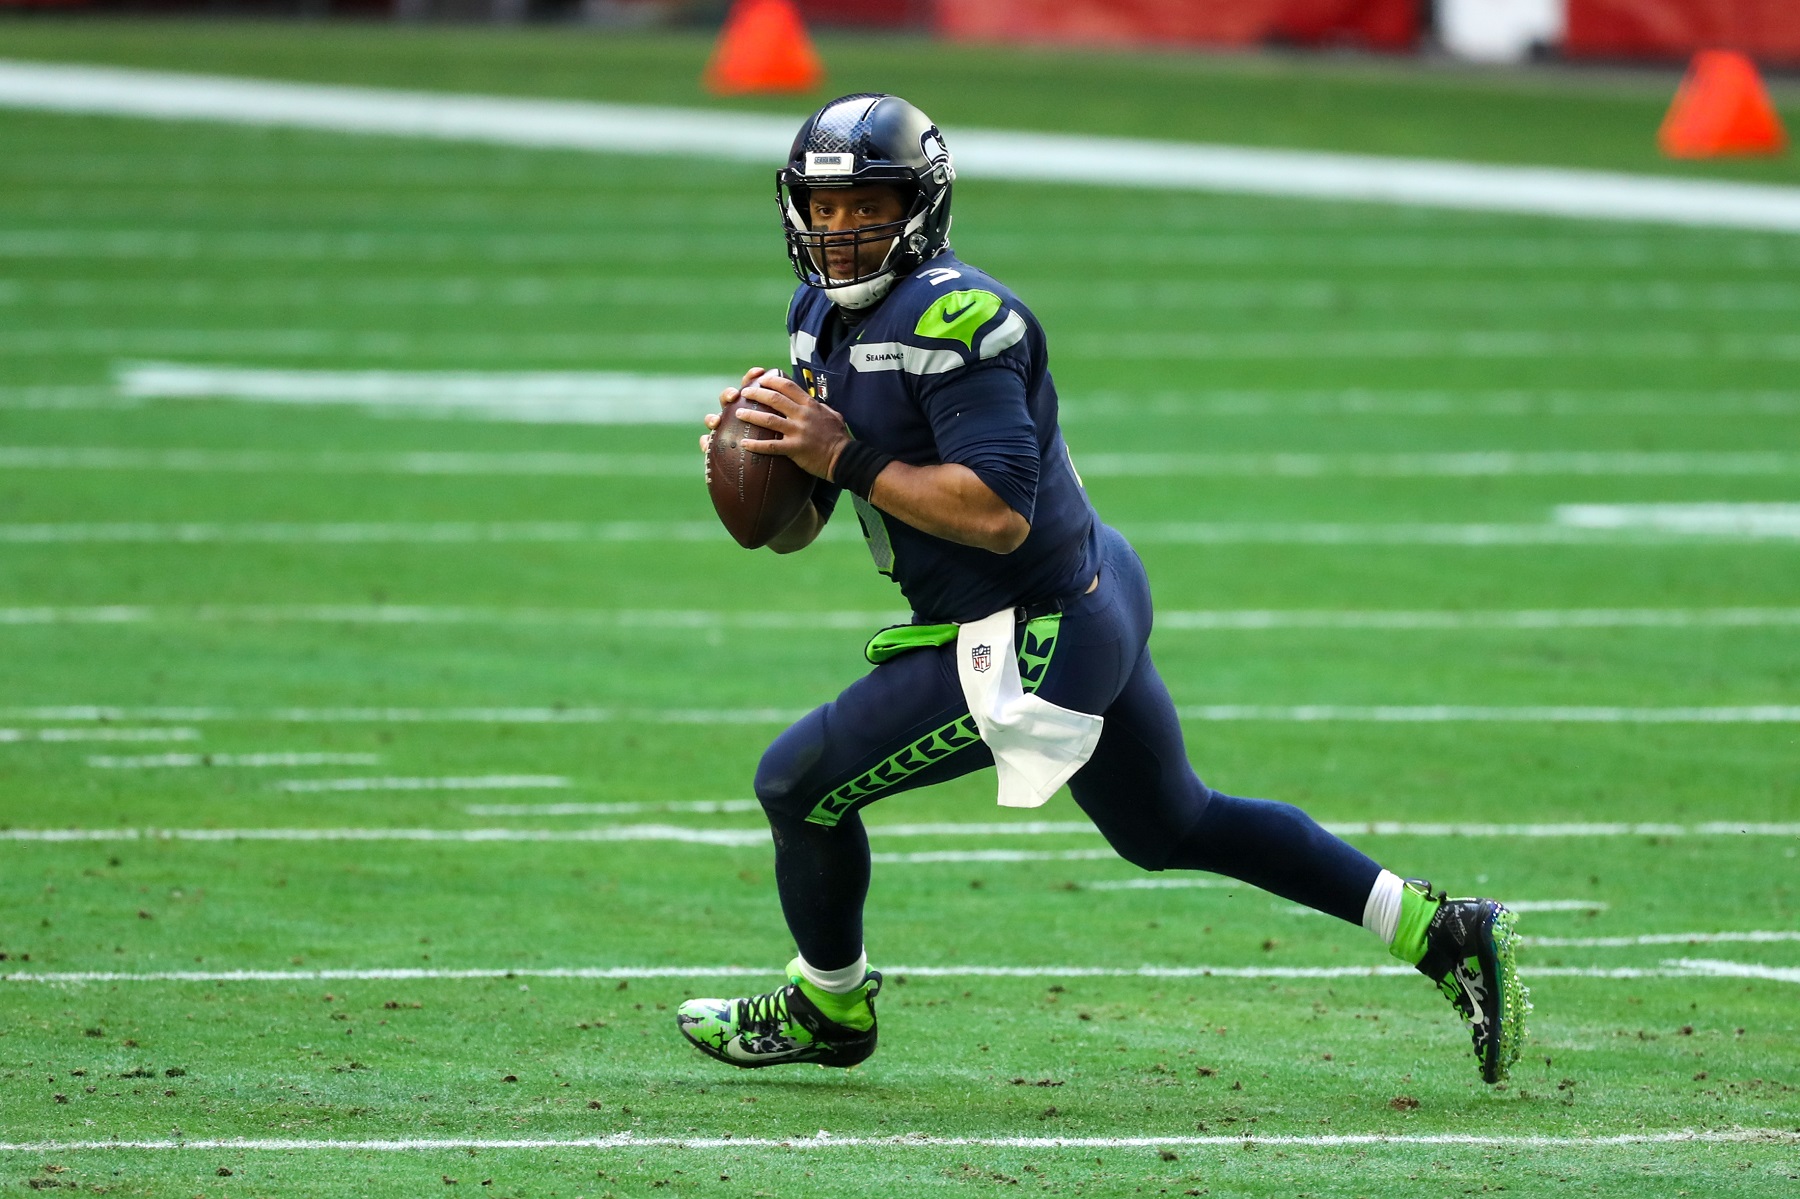 Seattle Seahawks QB Russell Wilson Has Received Bad News About His NFL Future